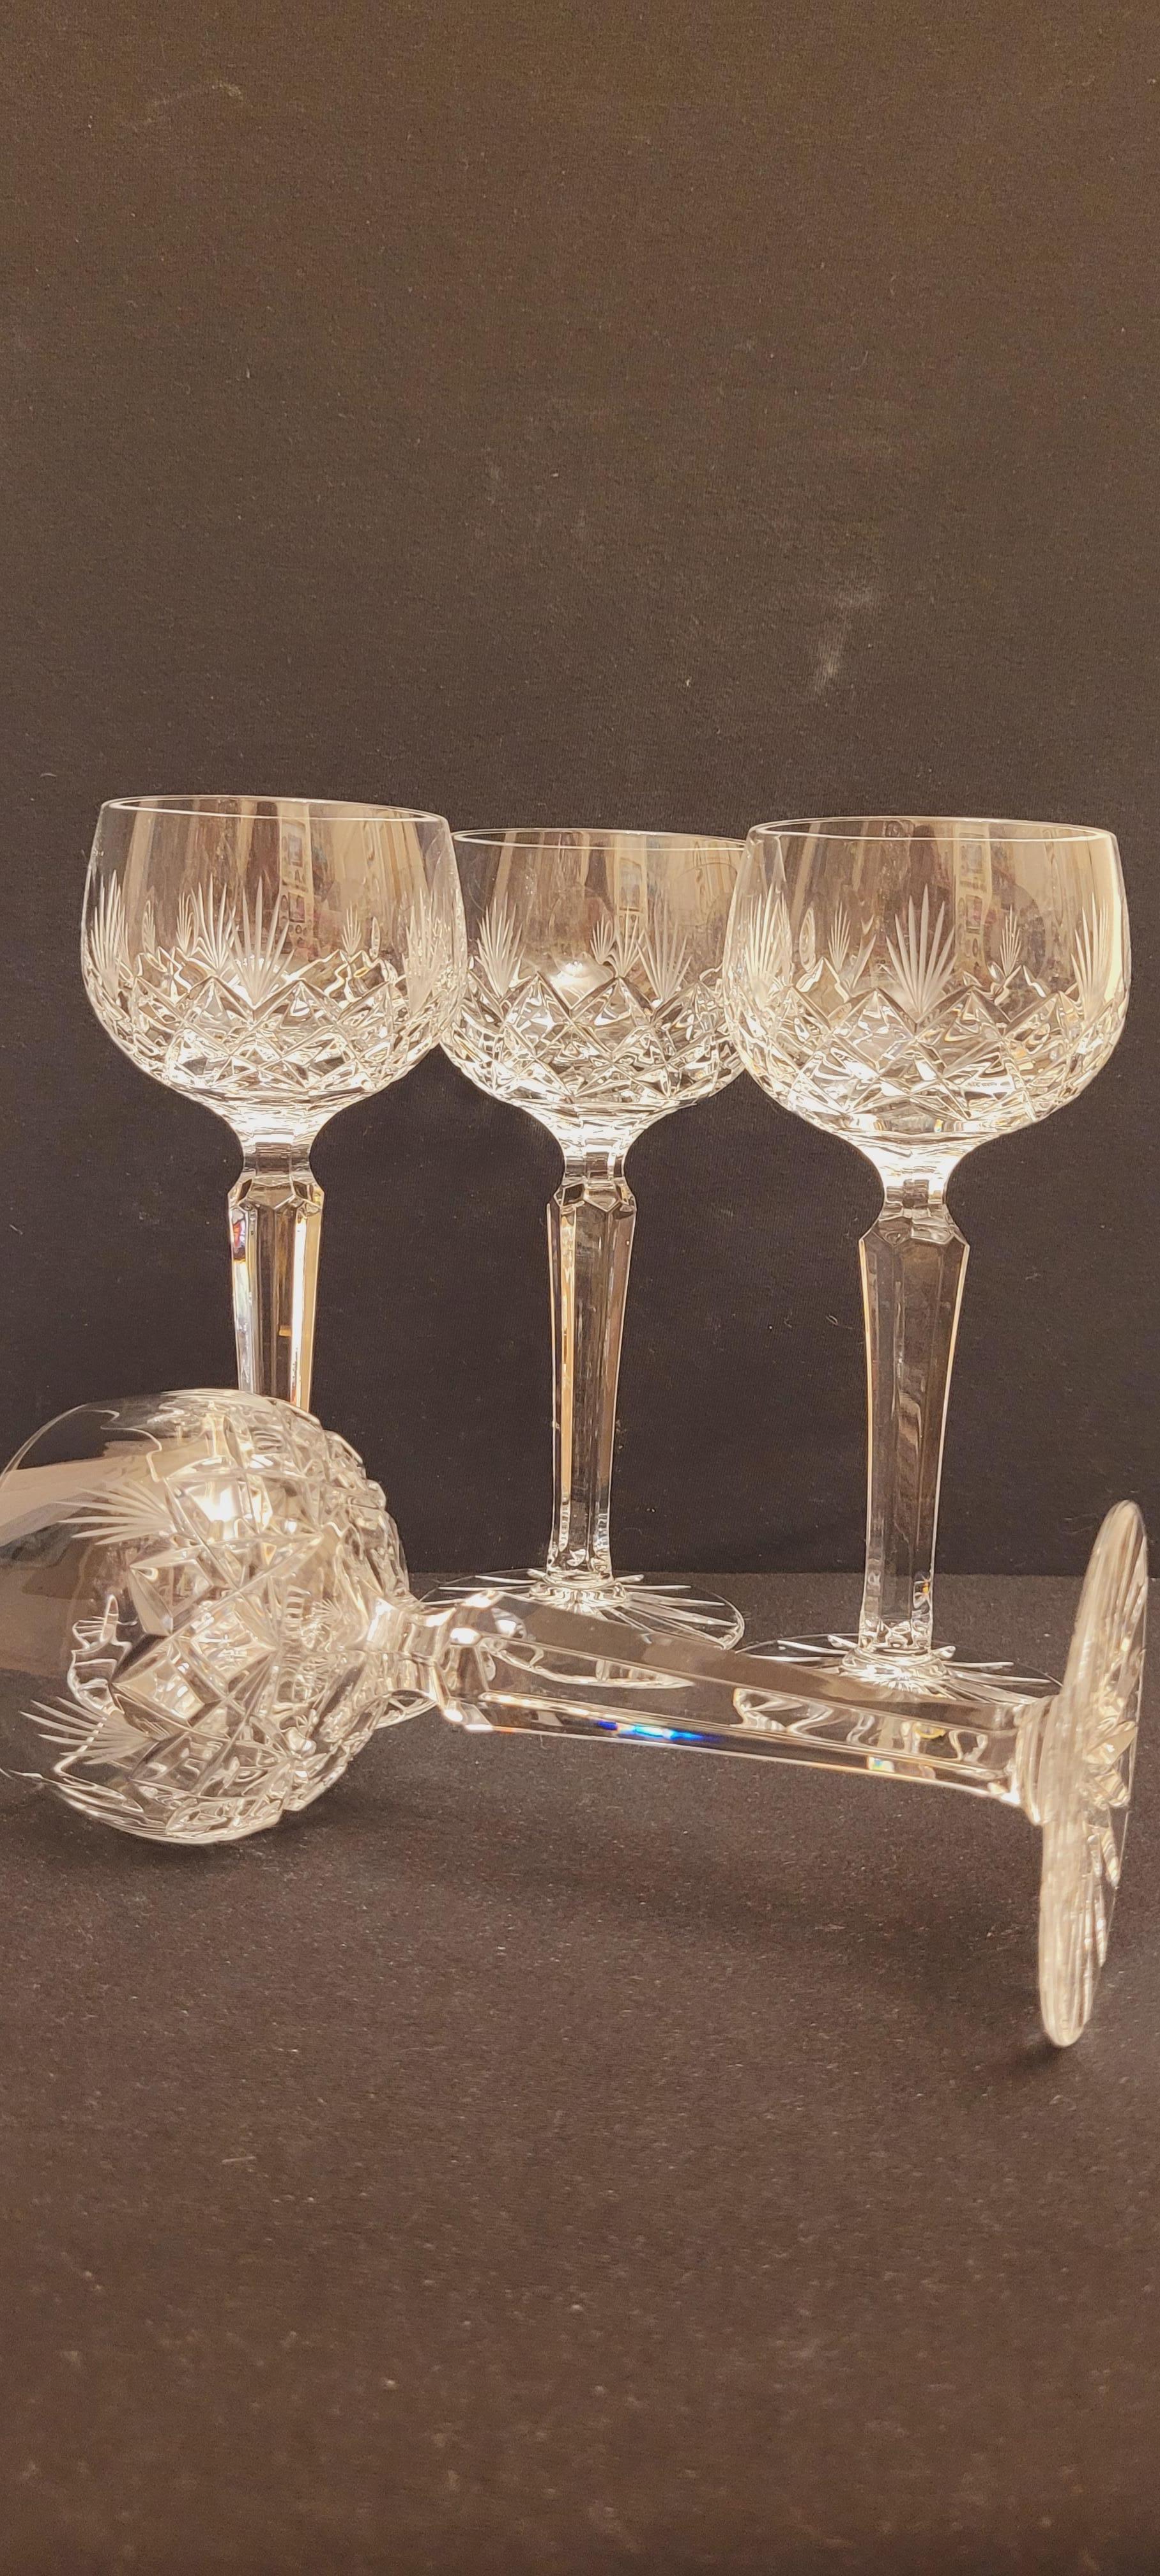 Hand-Crafted Vitange Bohemian Hand Brilliant Cut Crystal Set Glasses For Sale